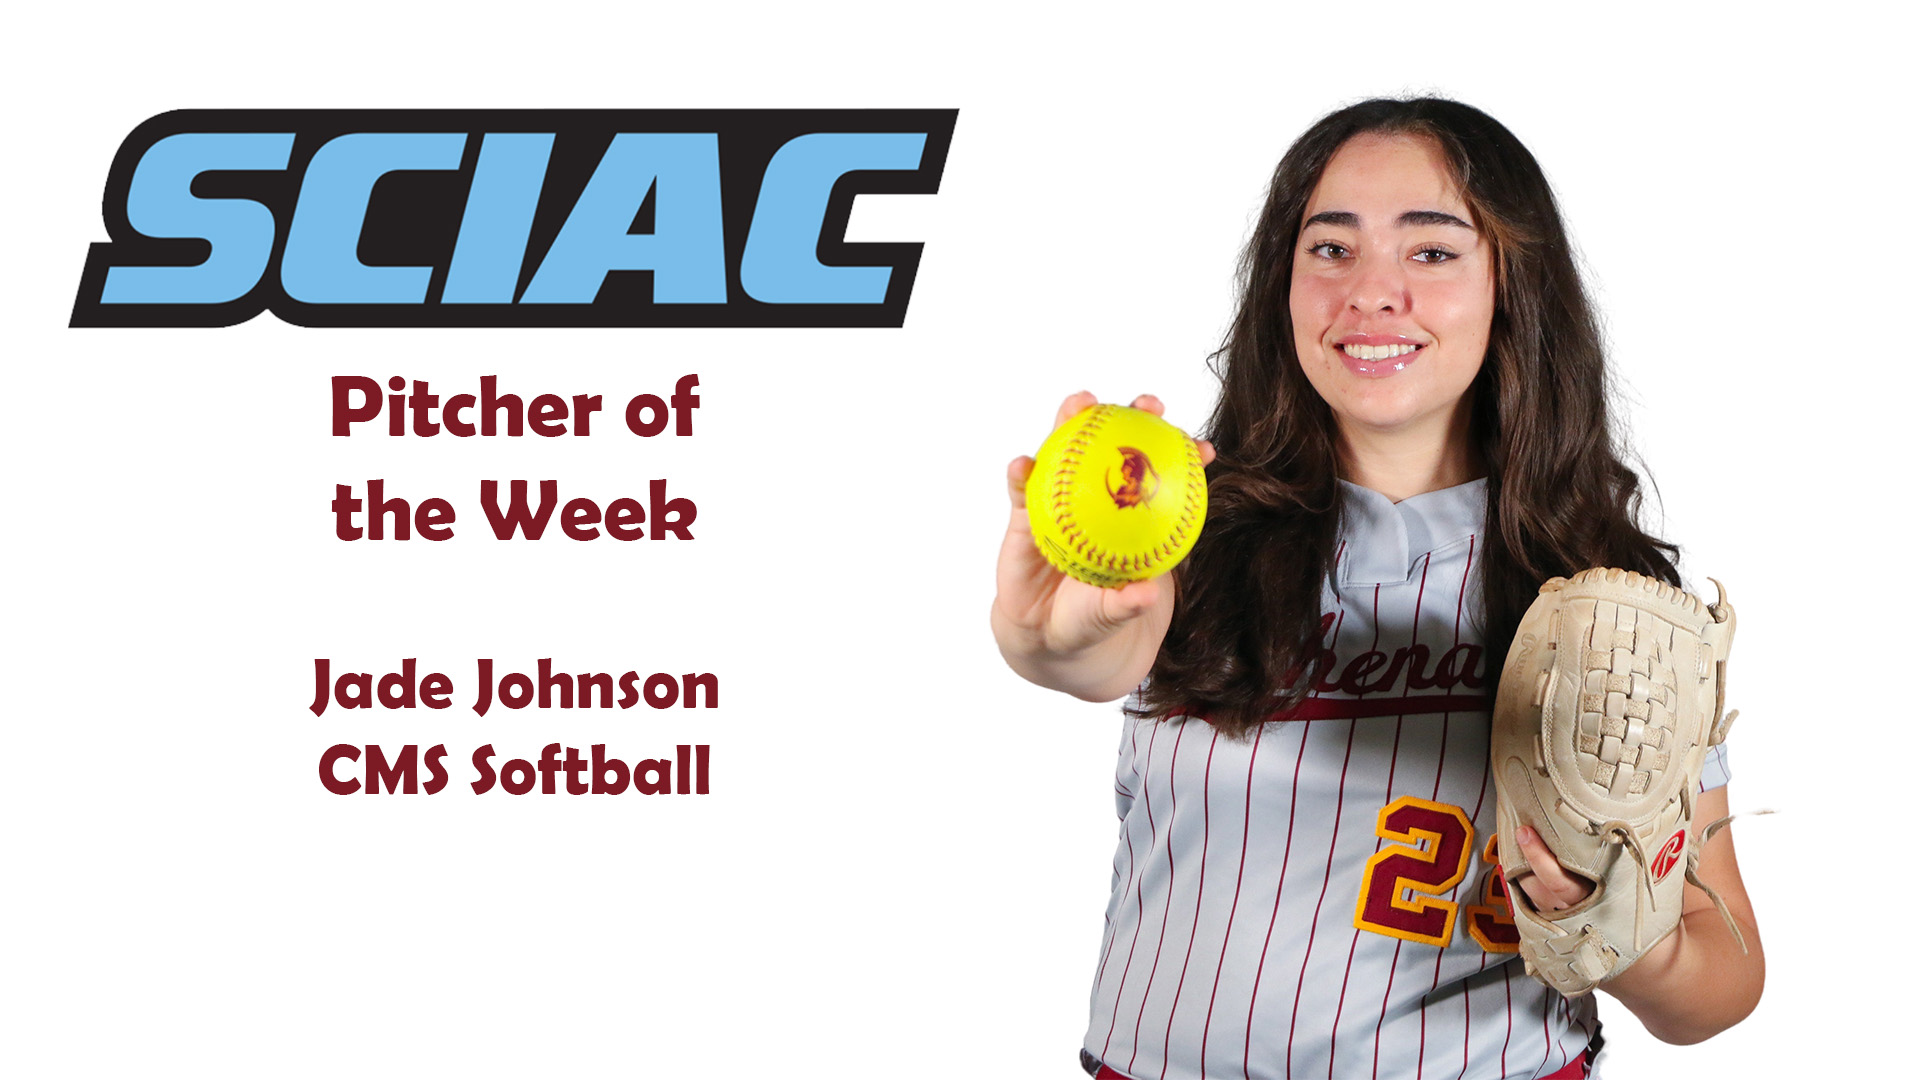 Posed shot of Jade Johnson with the SCIAC logo